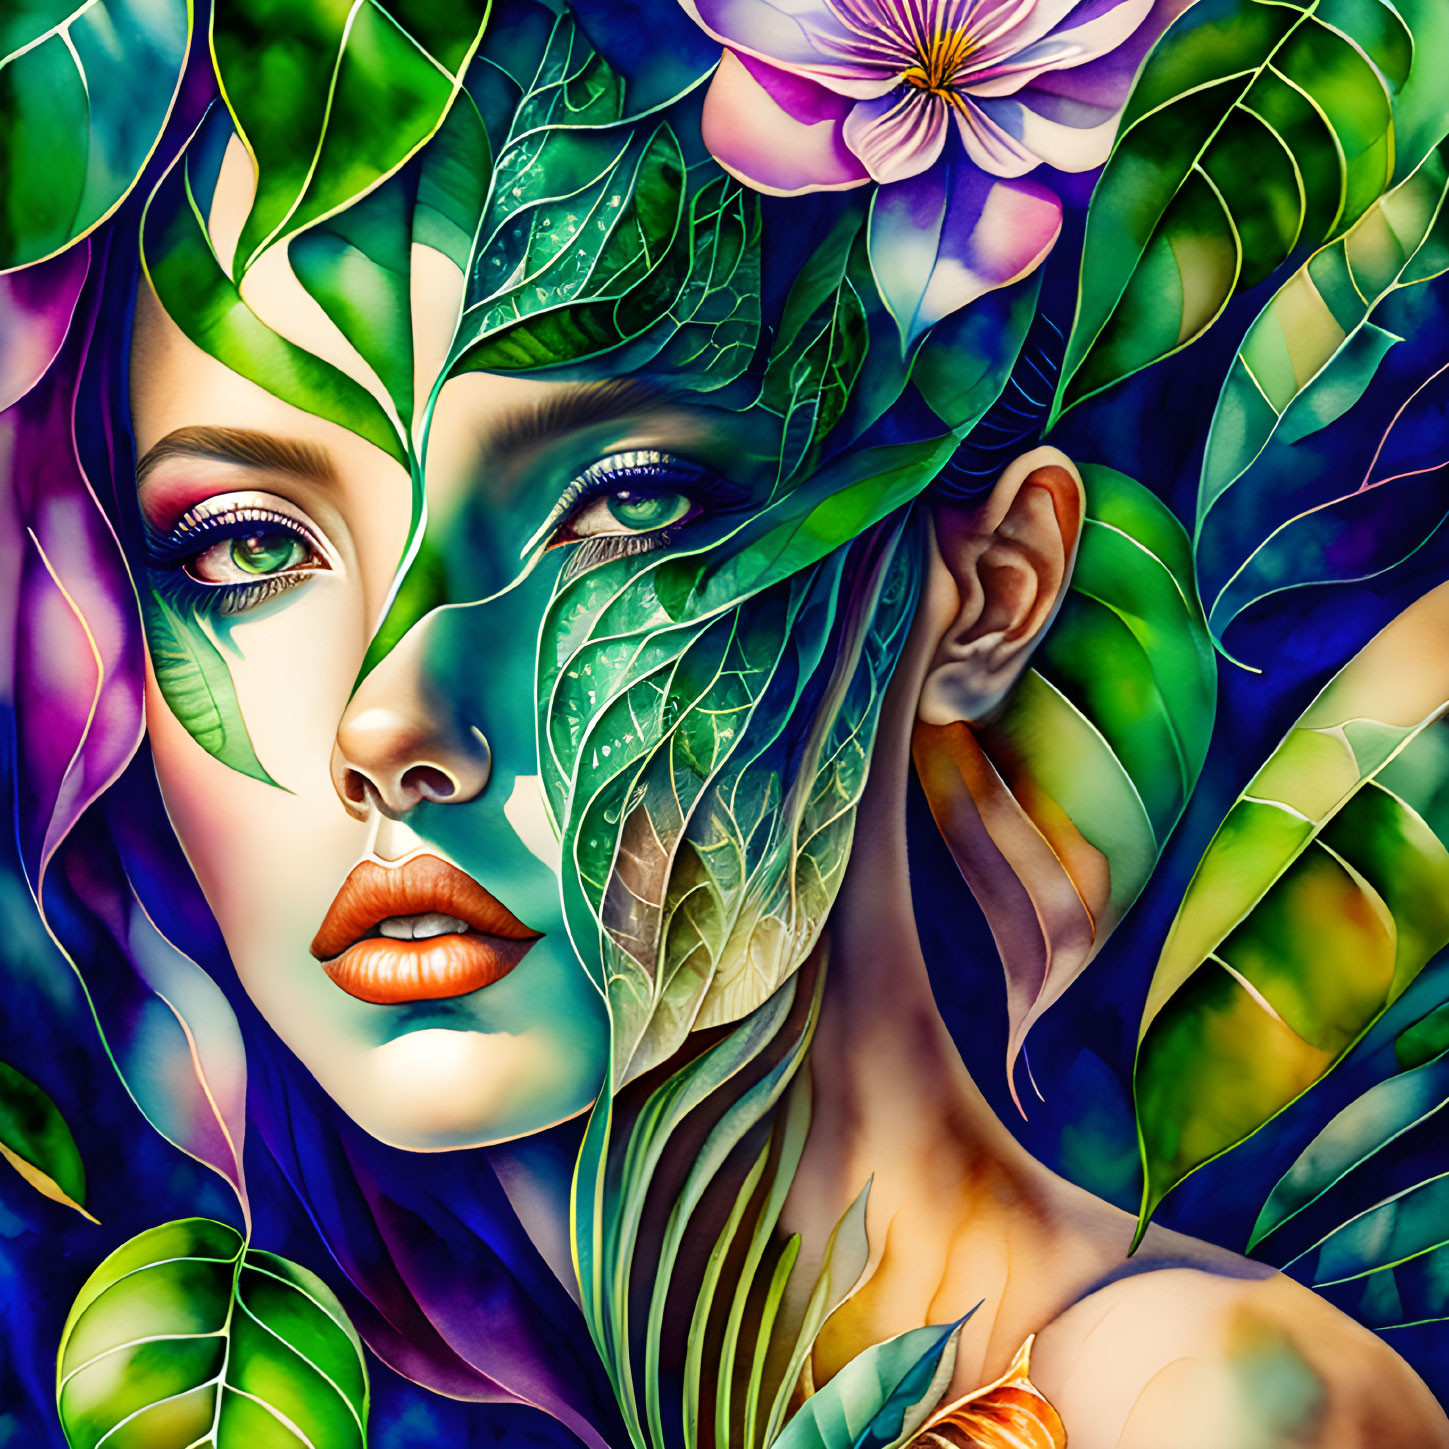 Vibrant illustration of woman with leaf patterns in mystical nature setting